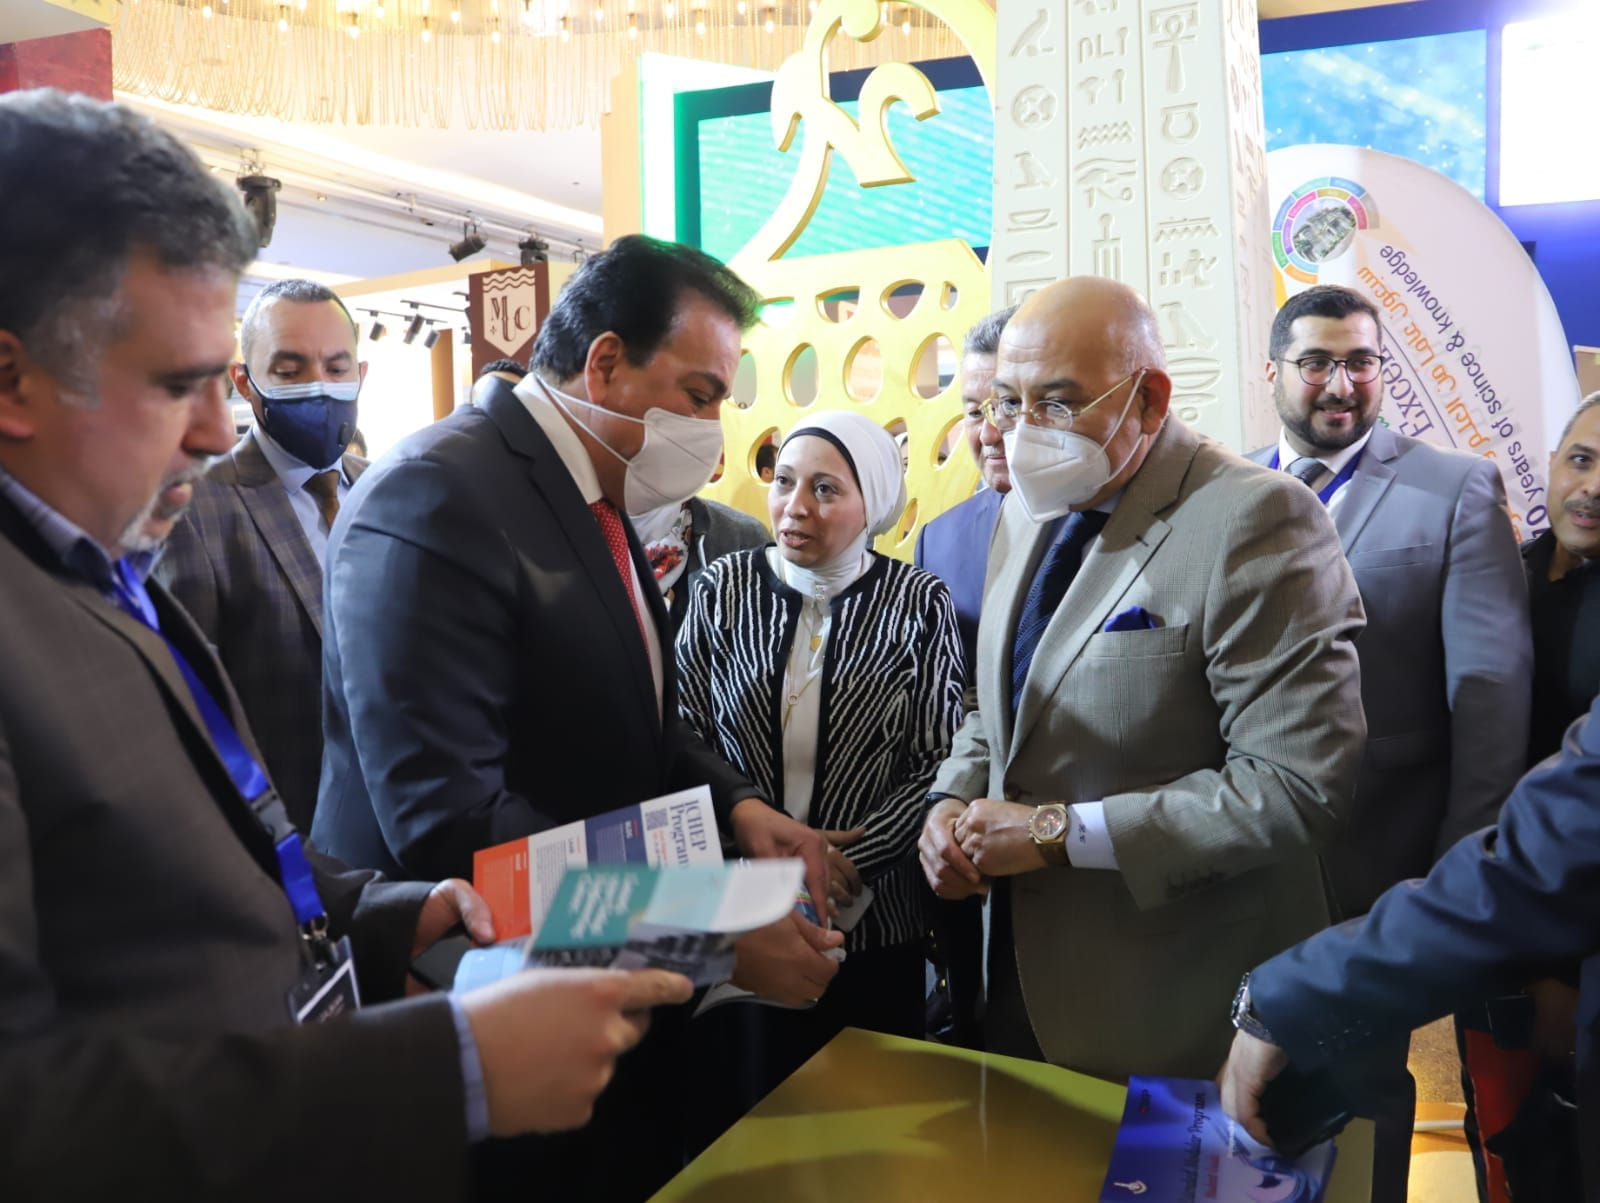 The Minister of Higher Education visits Ain Shams University pavilion at the International Forum of Universities and Scholarships EDUGATE